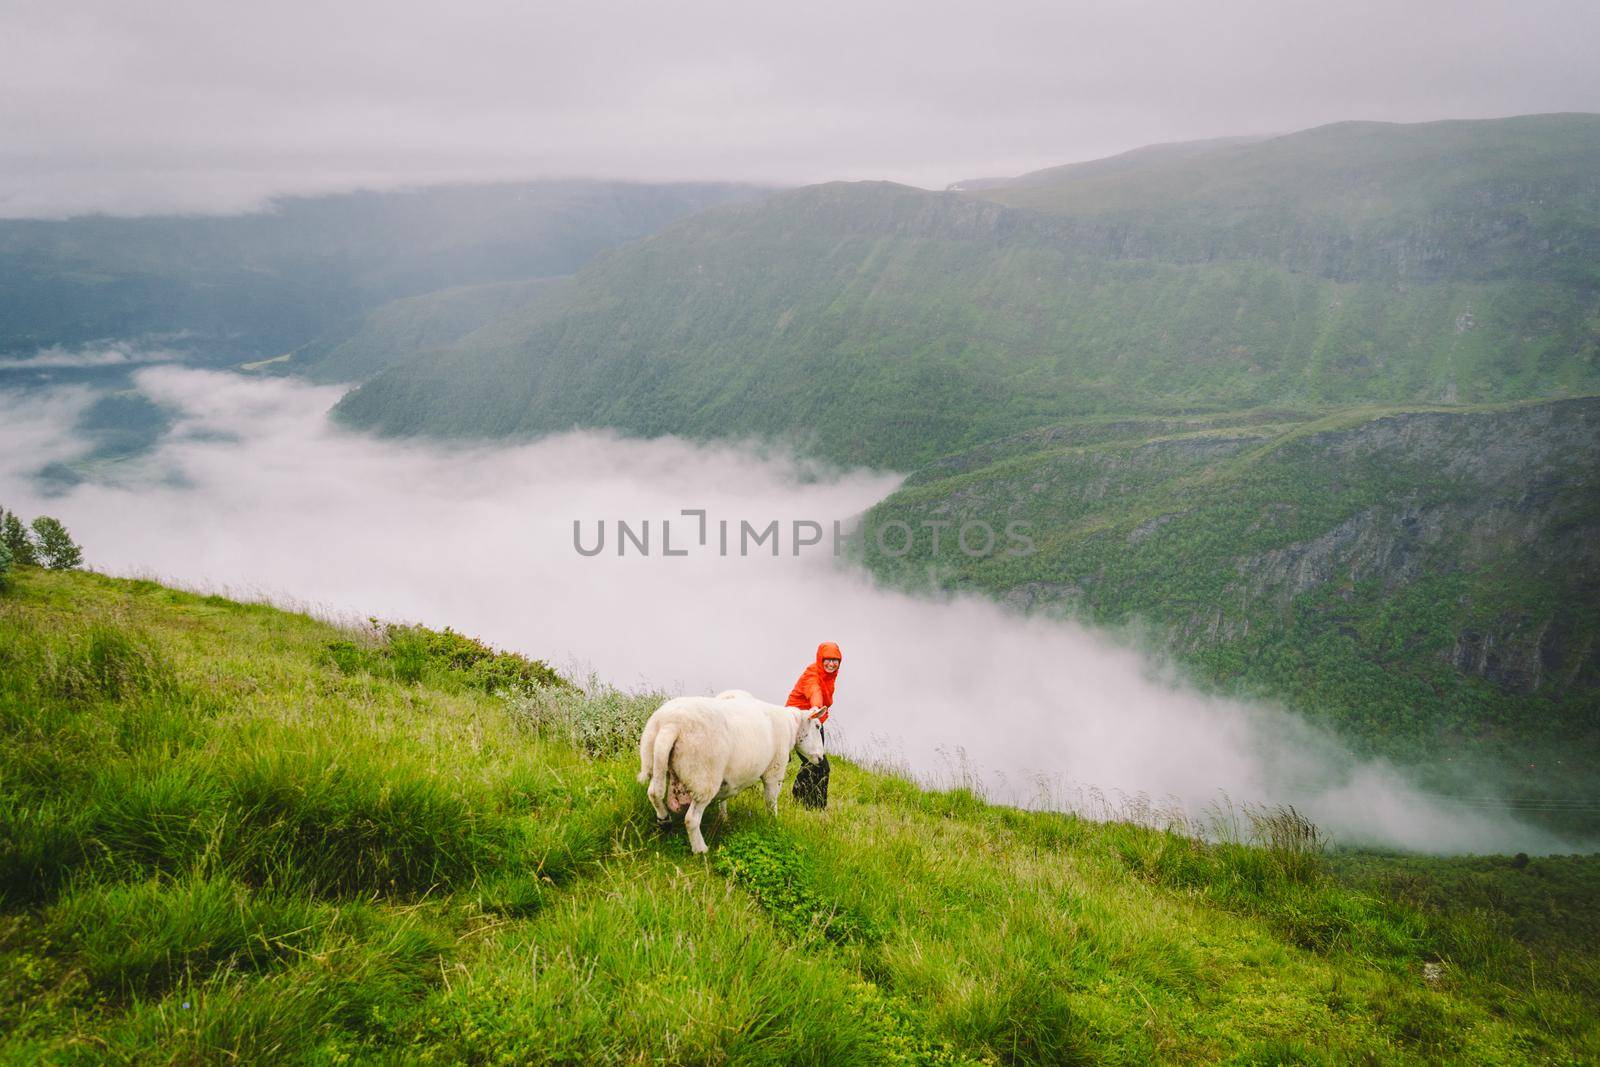 Woman hiker posing on mountain in norway in rainy weather near sheep. Tourist and cattle on clearing in a mountain area in the north norge in foggy. exploring nature in Scandinavia by Tomashevska